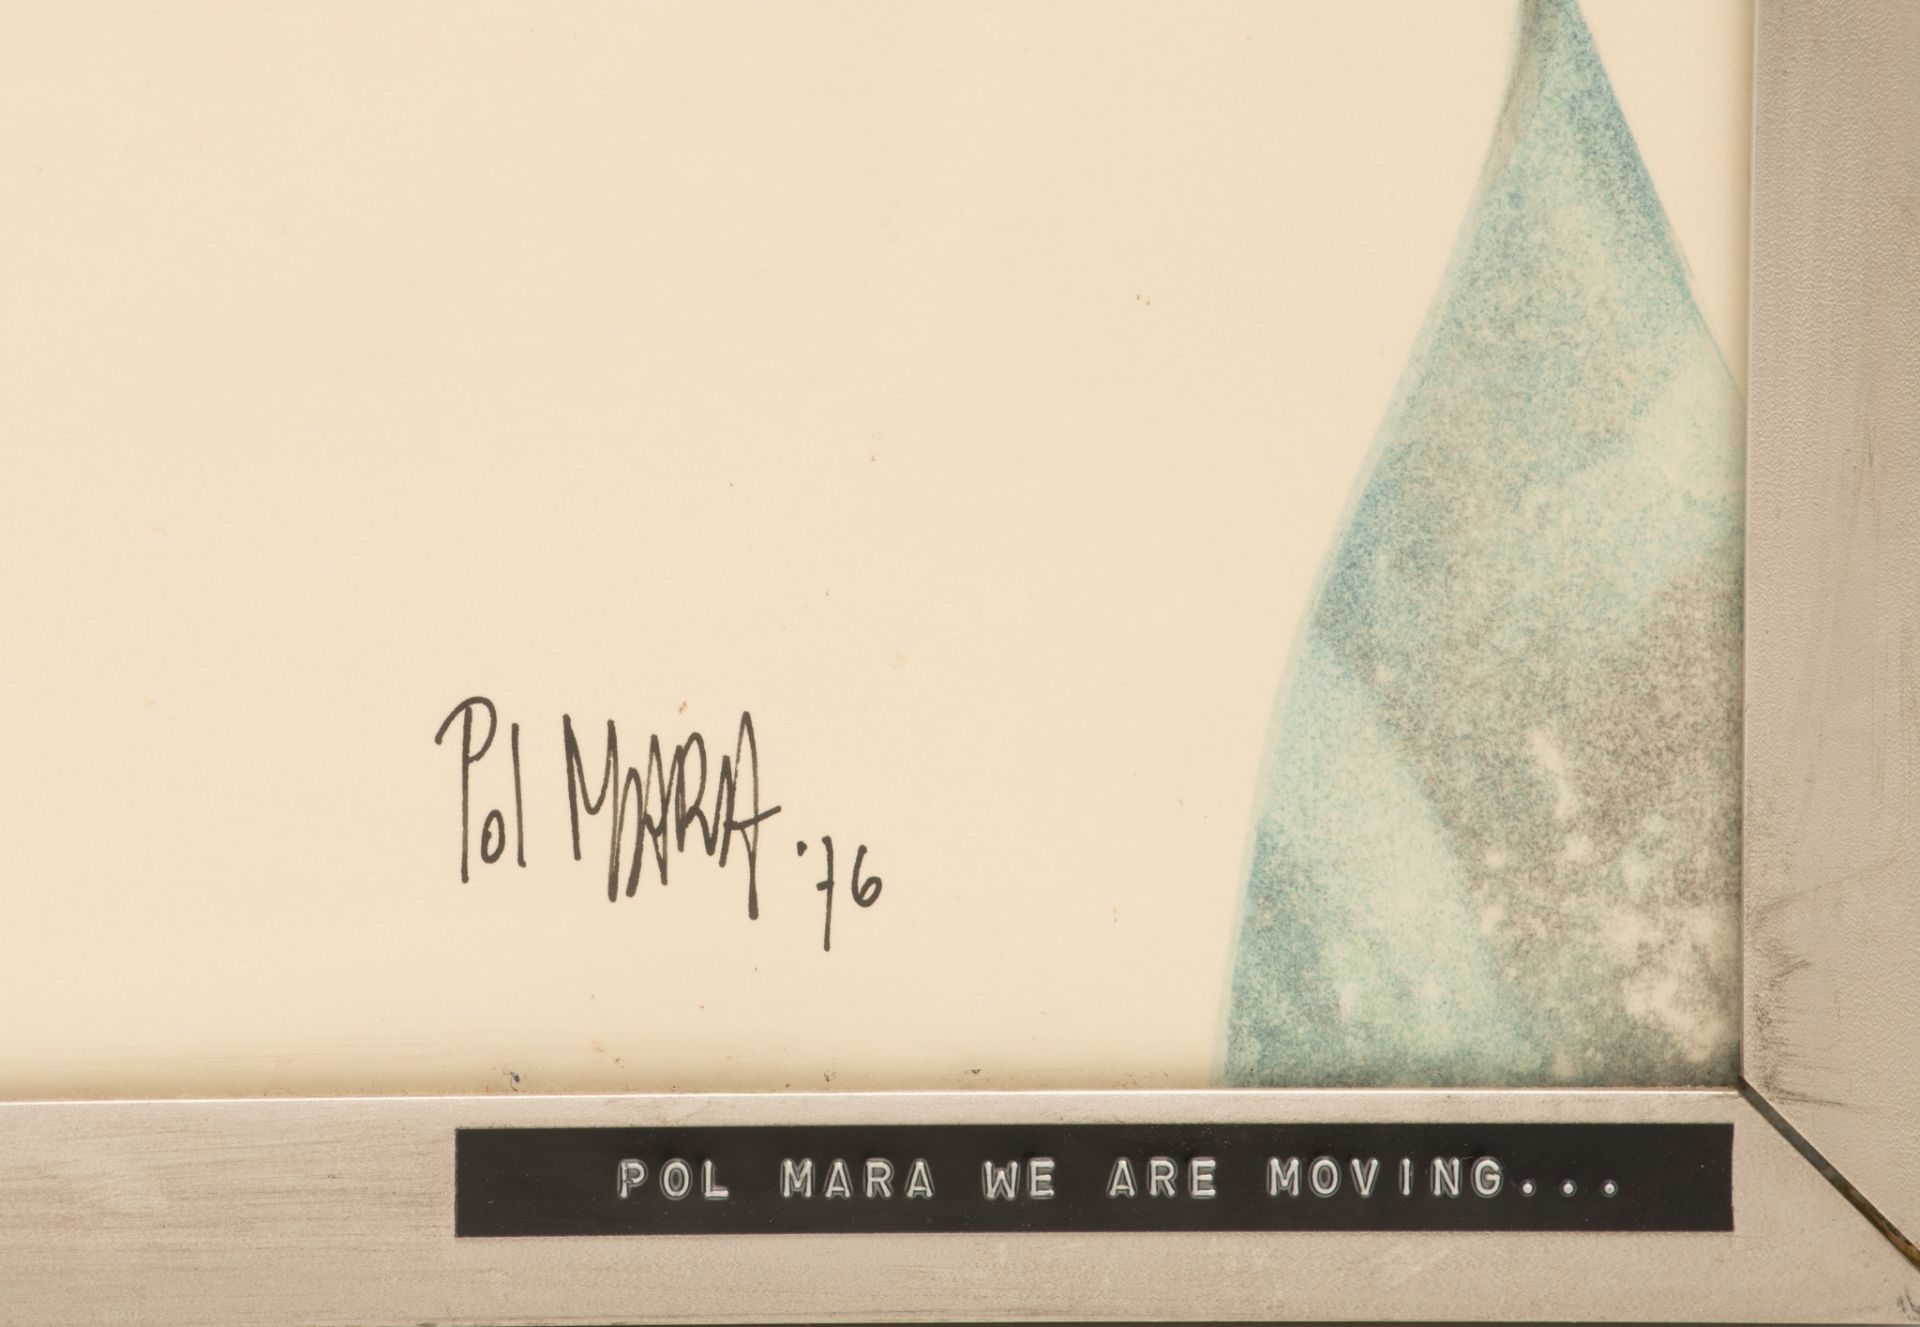 Pol Mara (1920-1998), 'We are moving...', watercolour and pencil, 70 x 108 cm, 1976 - Image 11 of 14